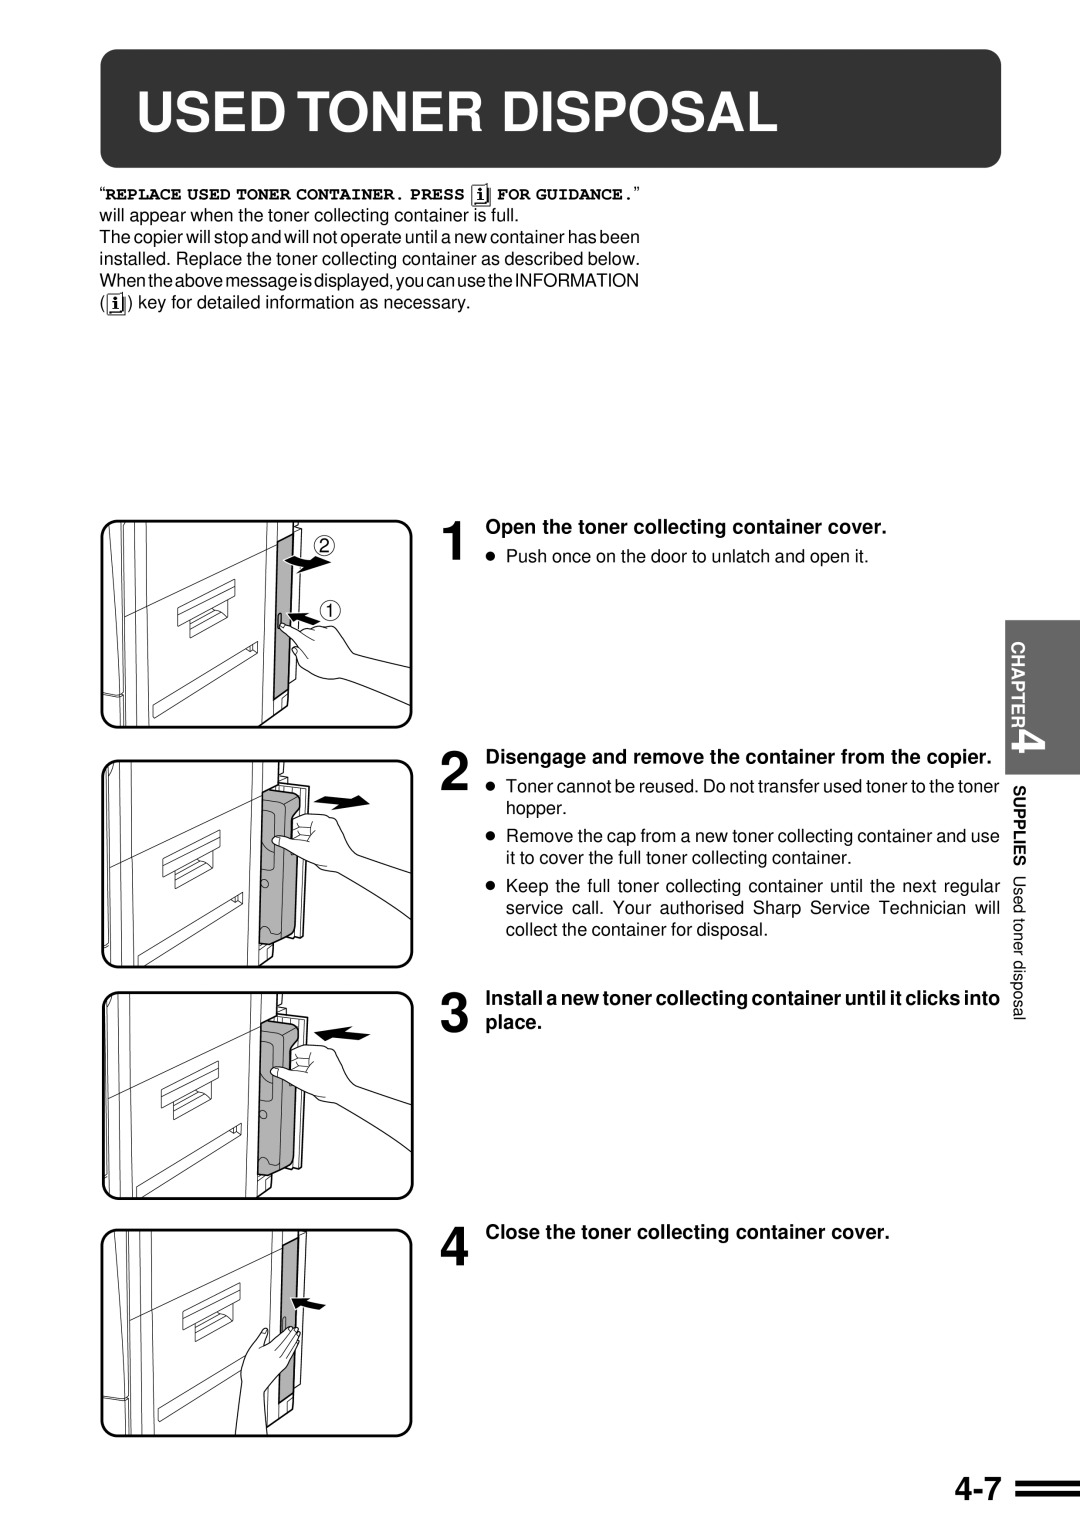 Sharp AR-507 operation manual Used Toner Disposal, Disengage and remove the container from the copier, place 